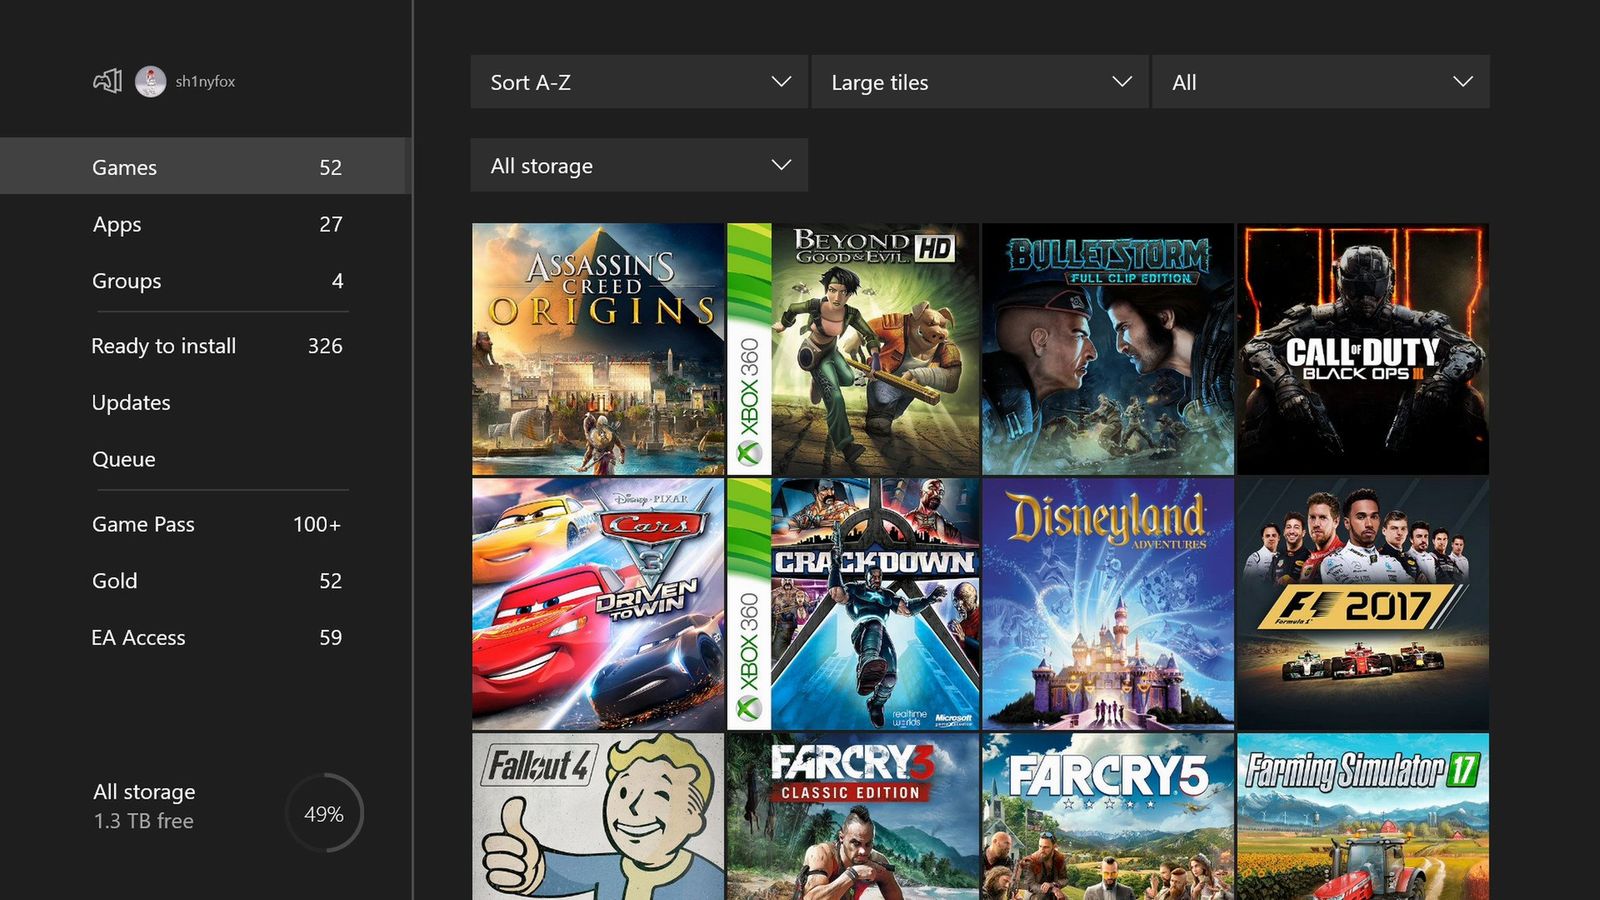 where to buy digital xbox one games